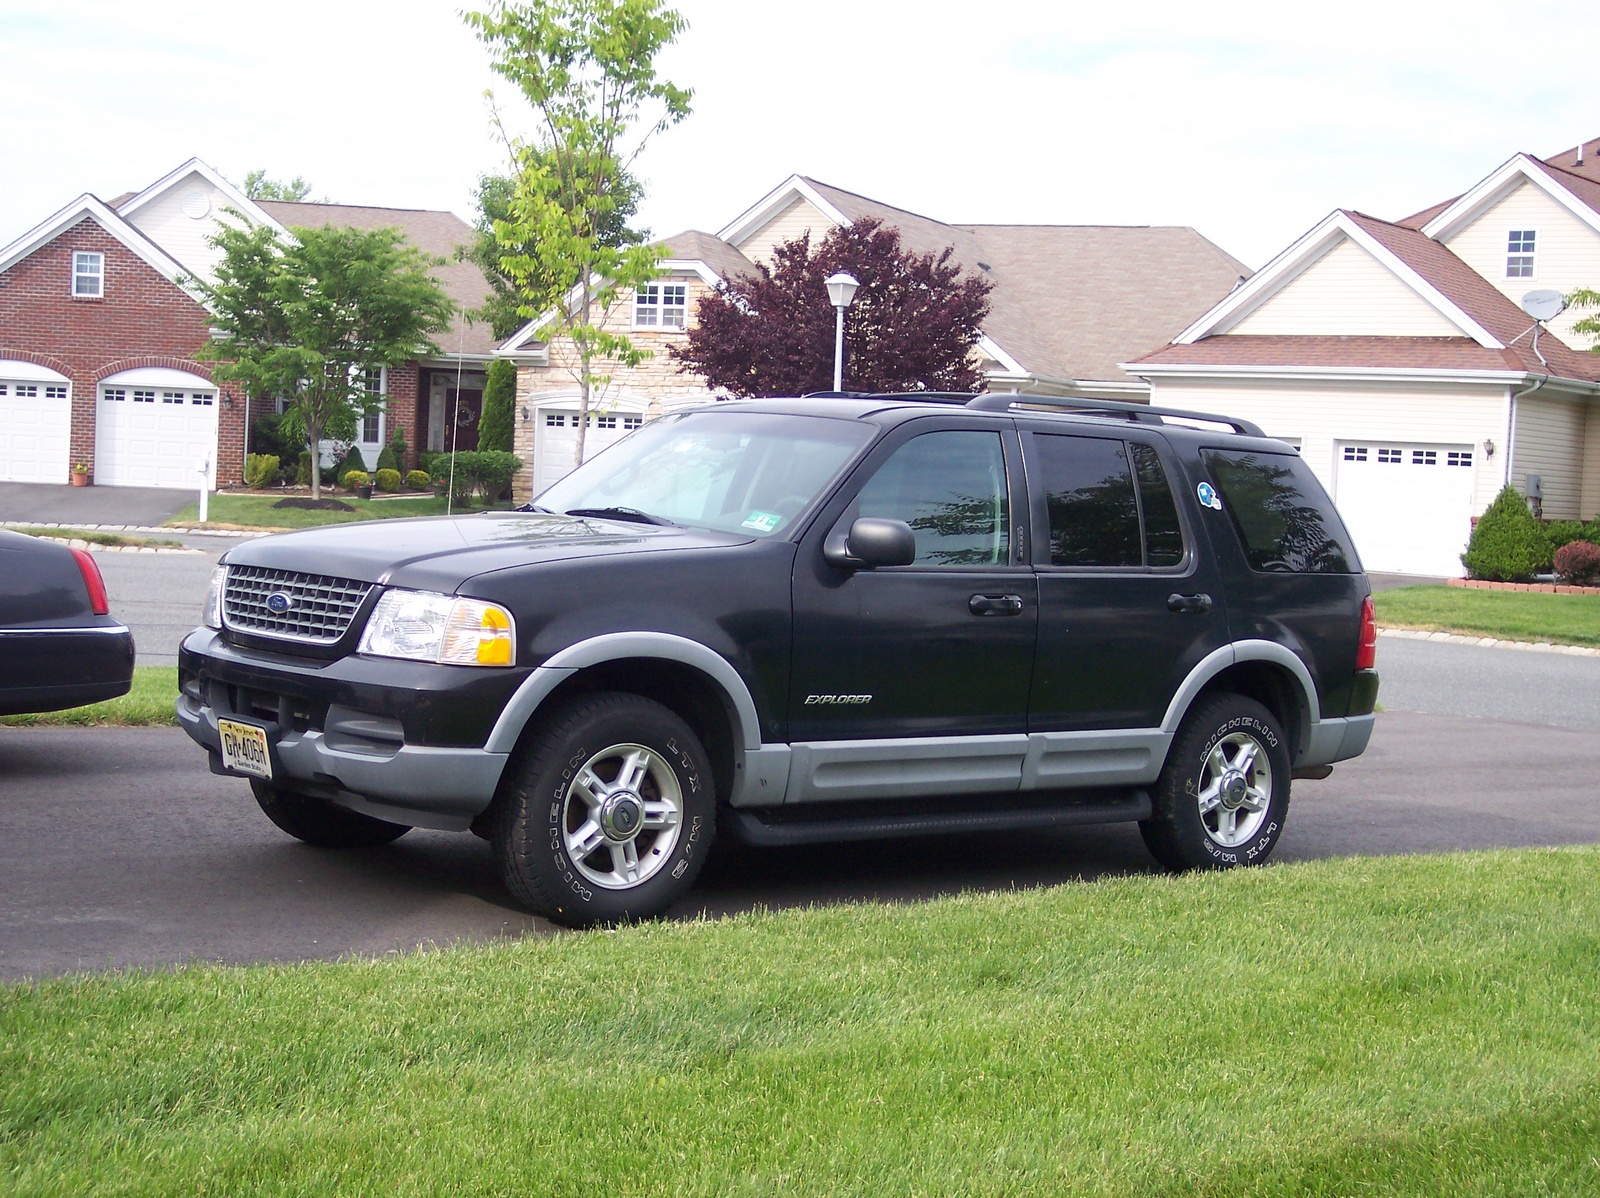 Wrecked 2002 ford explorer xls 4.0 all wheel drive #10